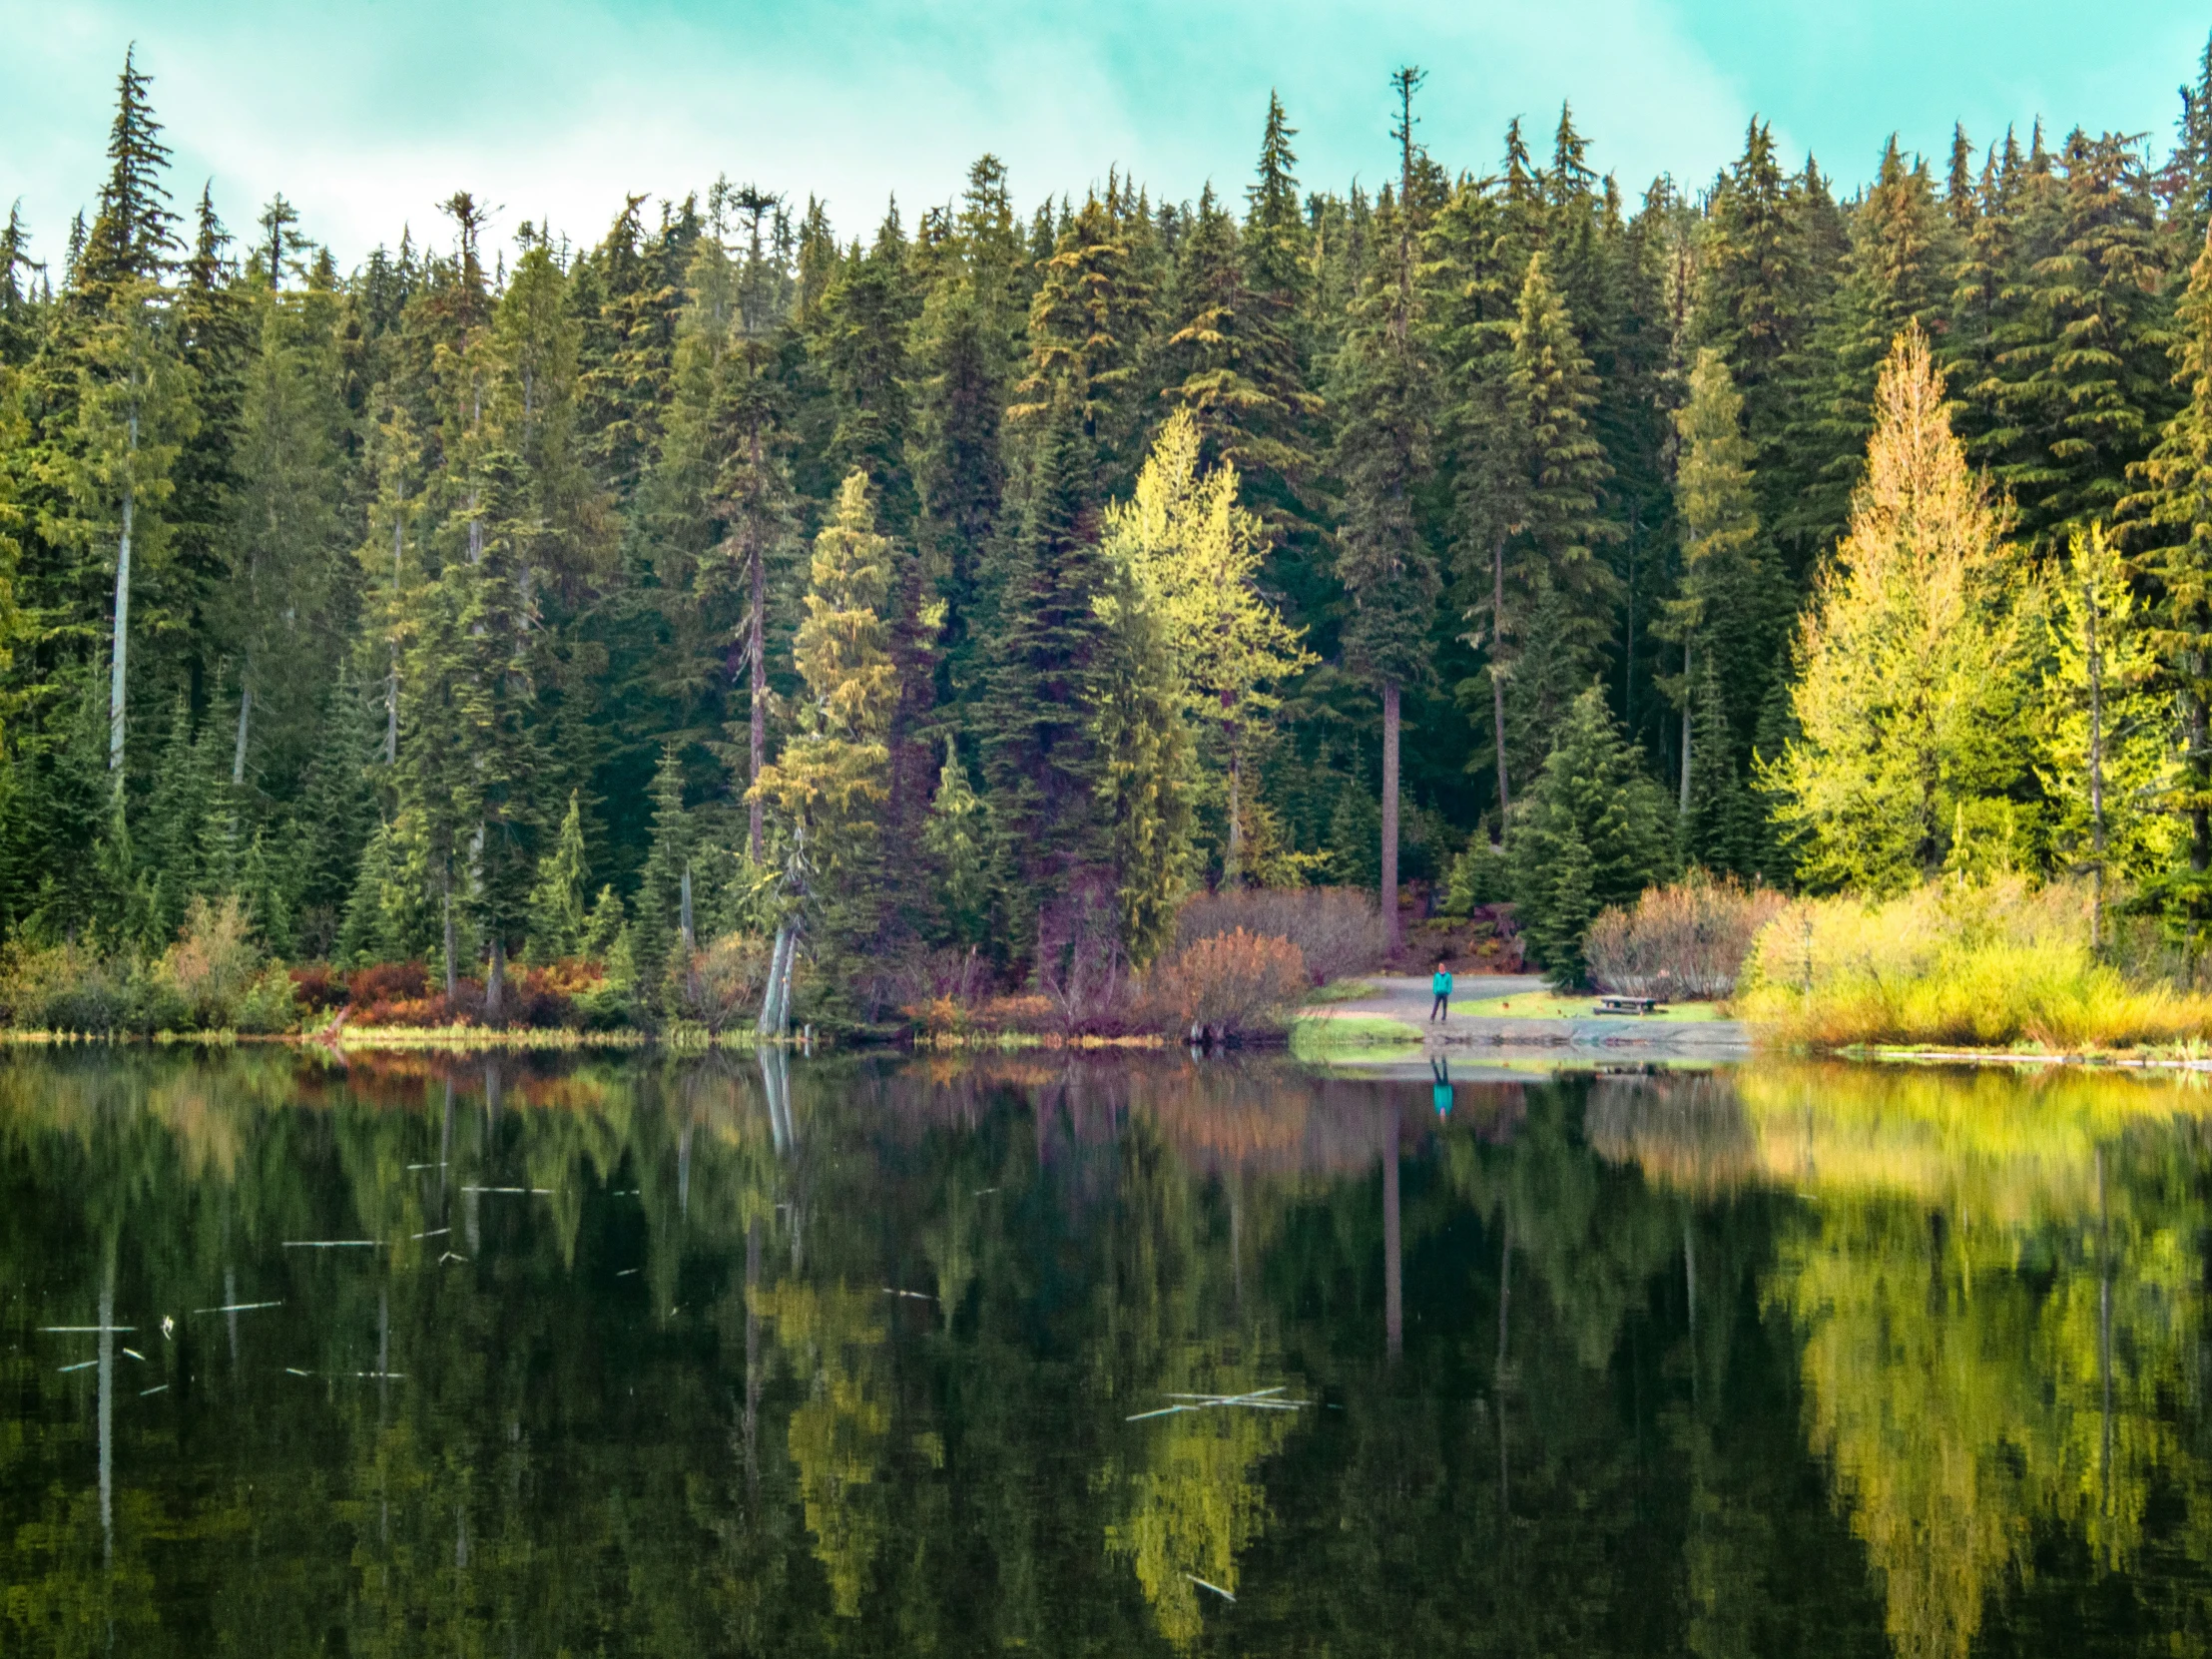 an image of a lake in the woods